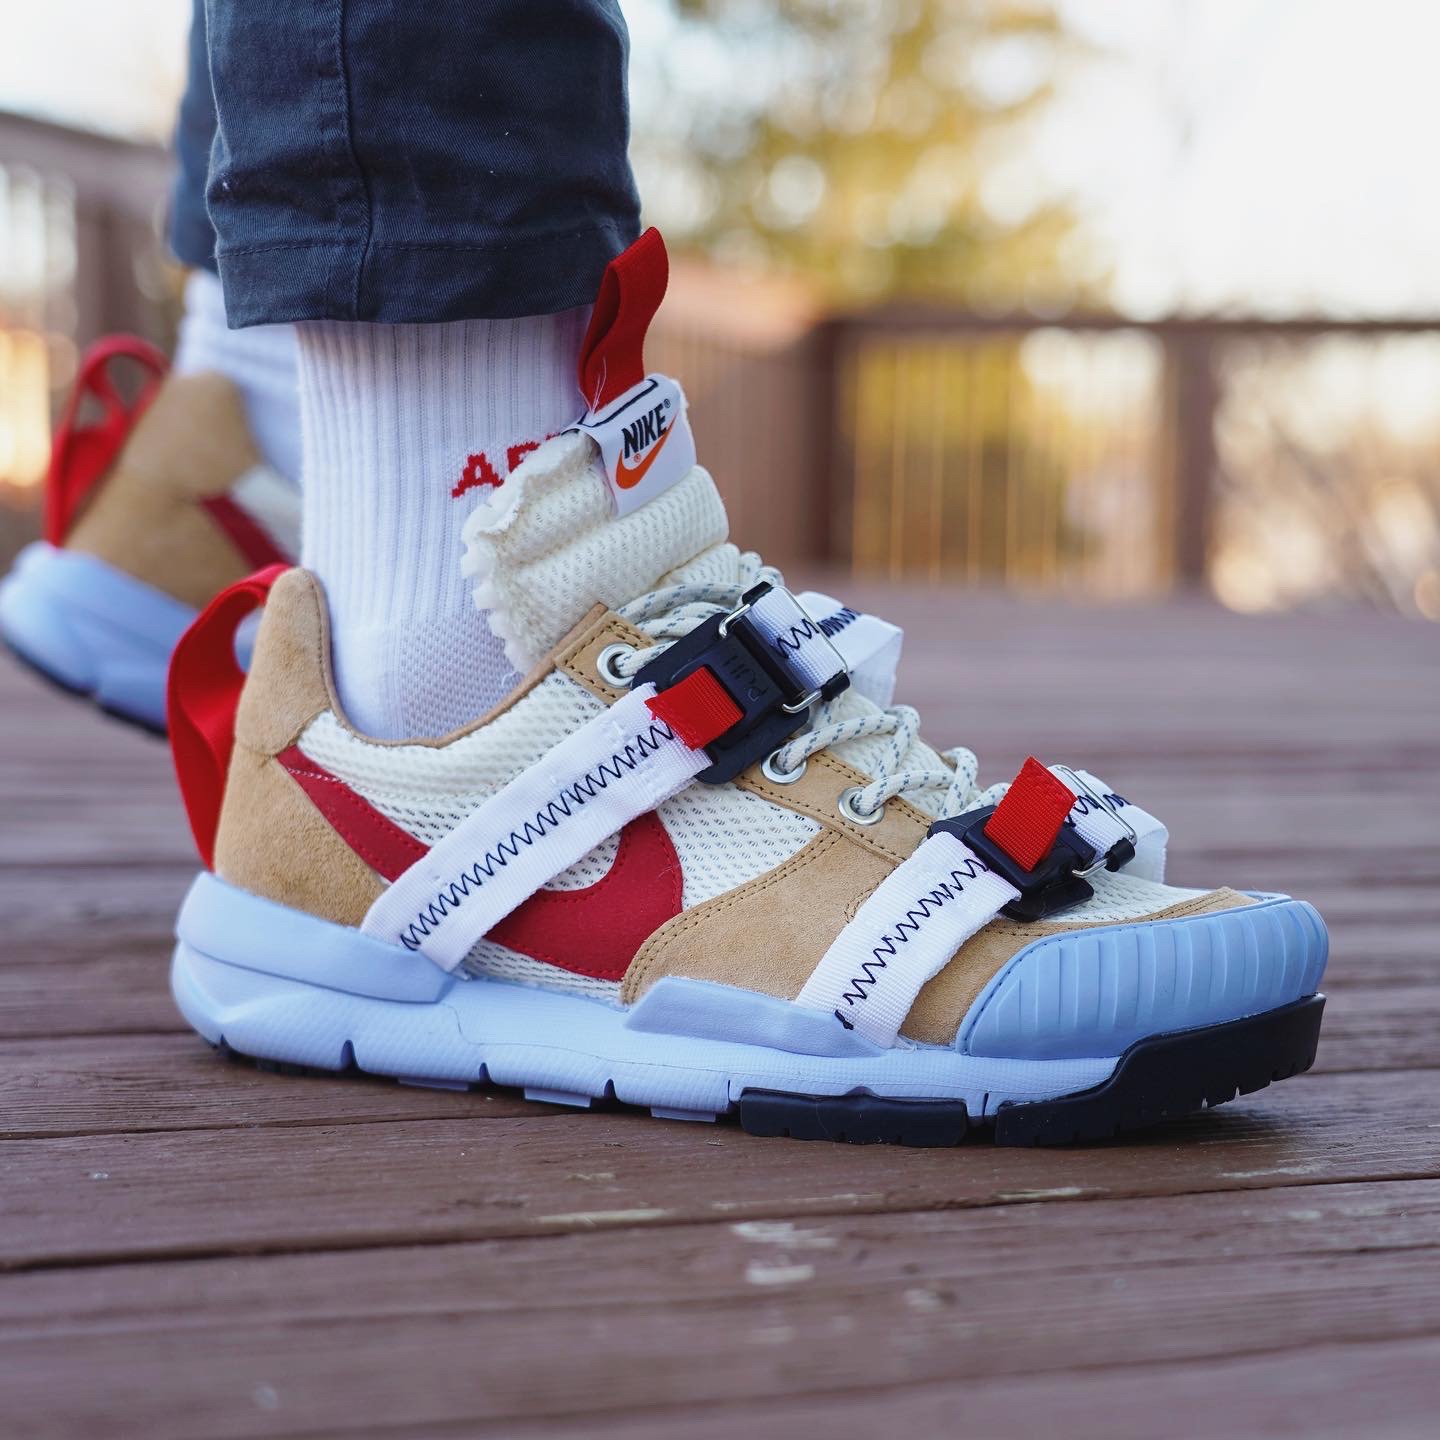 piek composiet Ambacht Seth Fowler on Twitter: "Not the first, but I'm still proud of myself for  goin for it. The Tom Sachs x @Nike Mars Yard Overshoe / Mars Yard 2.1  https://t.co/4s0tRHuKAE" / Twitter